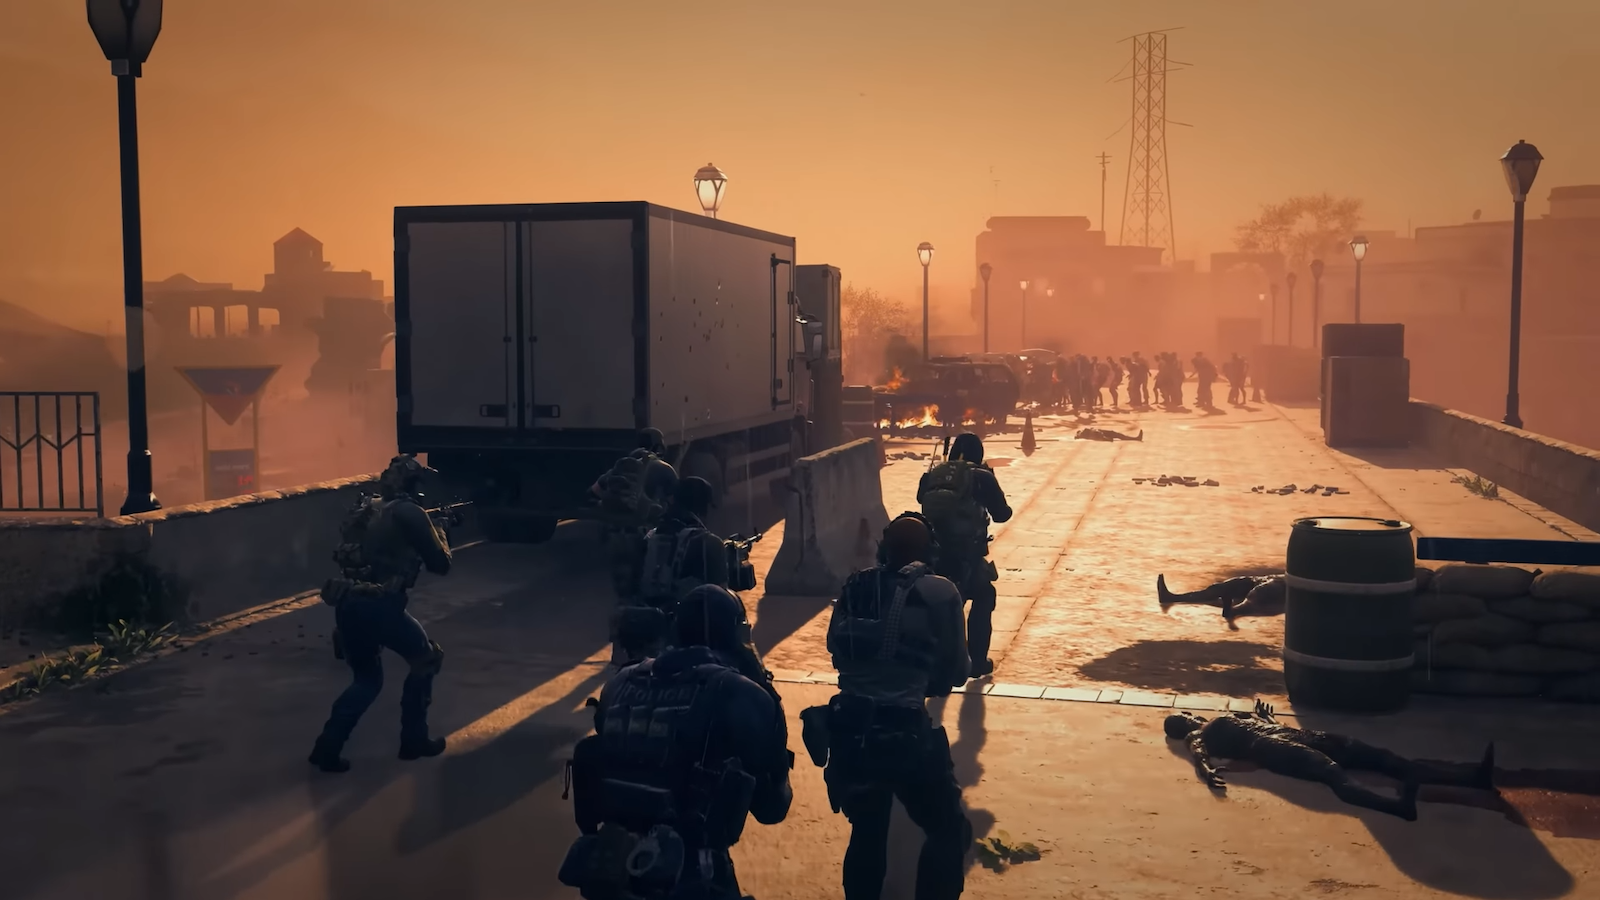 Modern Warfare 3 Zombies: Trailer, map, gameplay features, & more